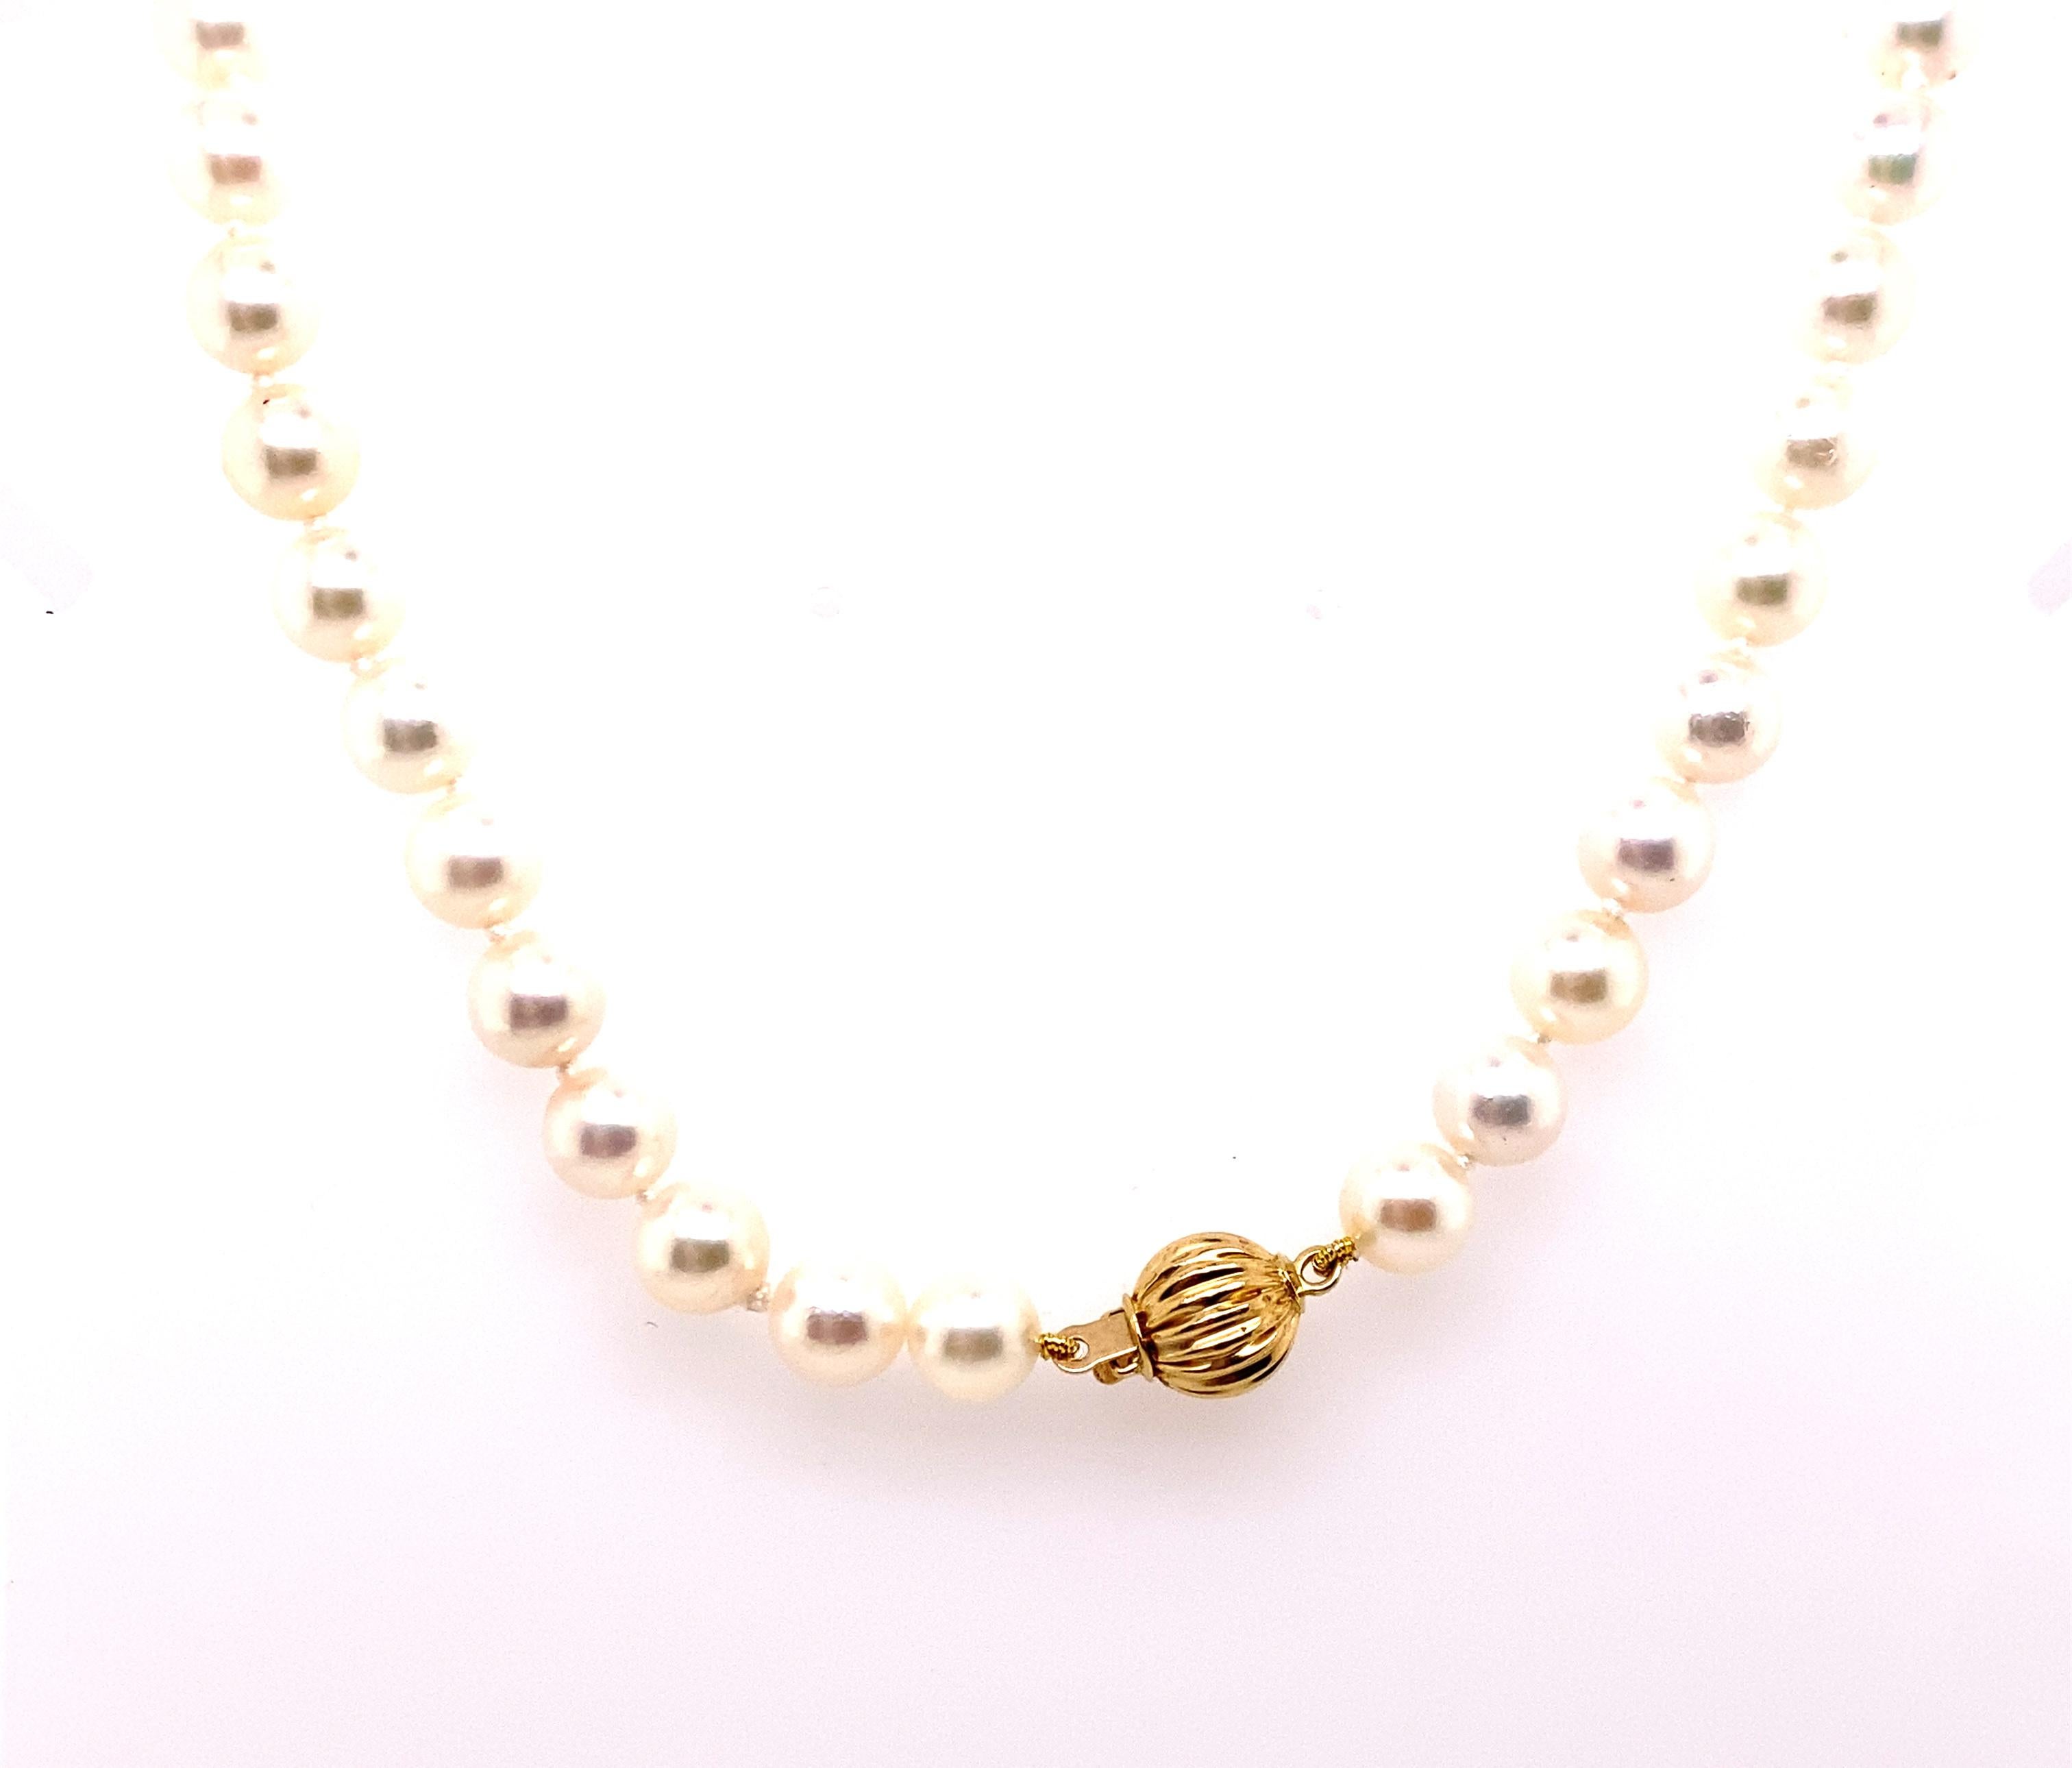 24 inch cultured pearl necklace